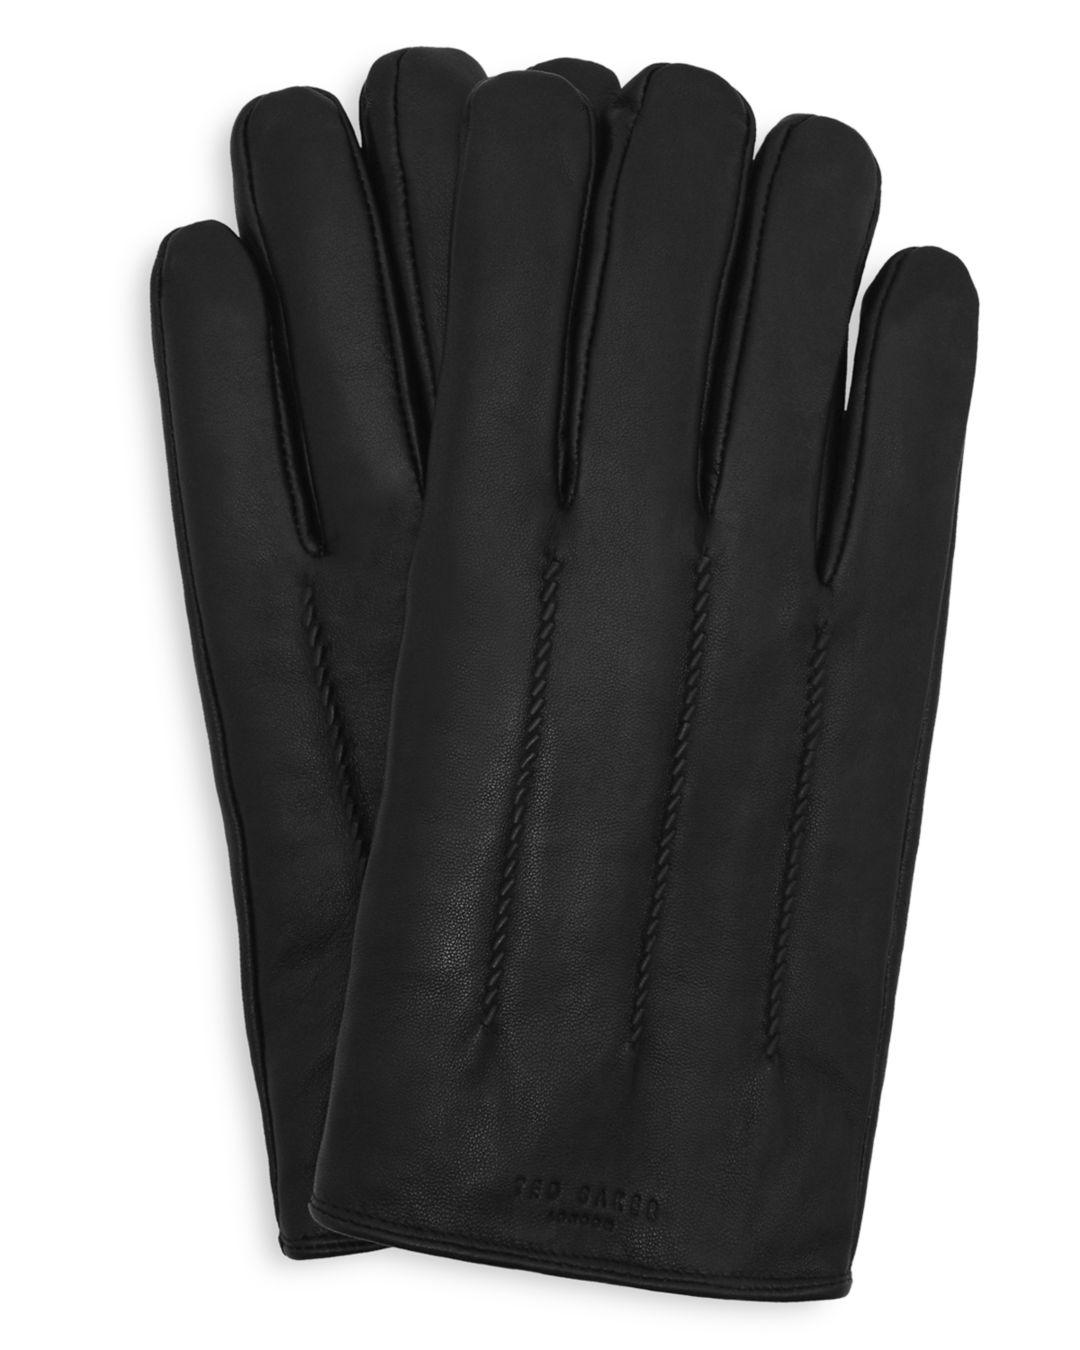 Ted Baker Leather Wool-lined Gloves in Black for Men - Lyst